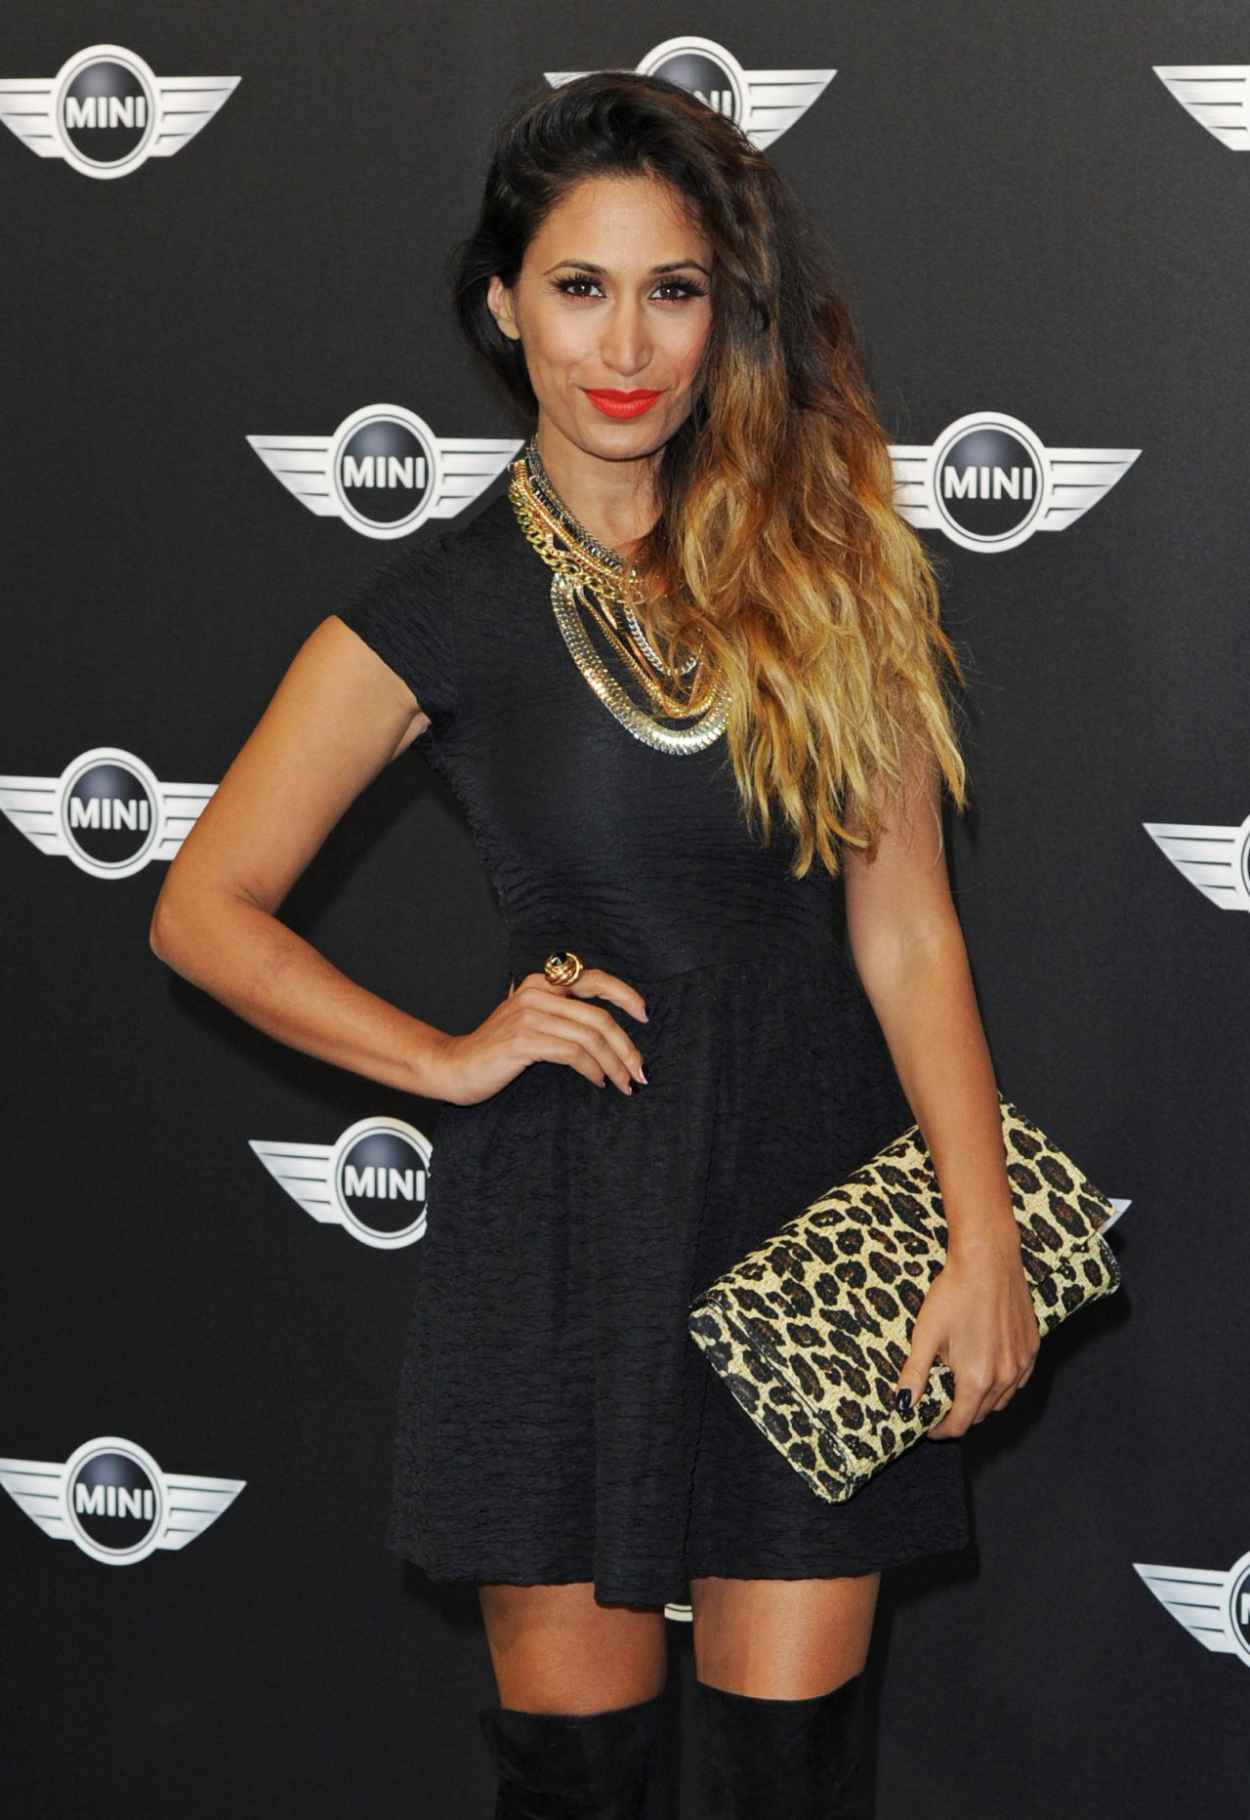 Preeya Kalidas Red Carpet Photos - The MINI Launch Party at The Old Sorting Office in London - November 2015-1